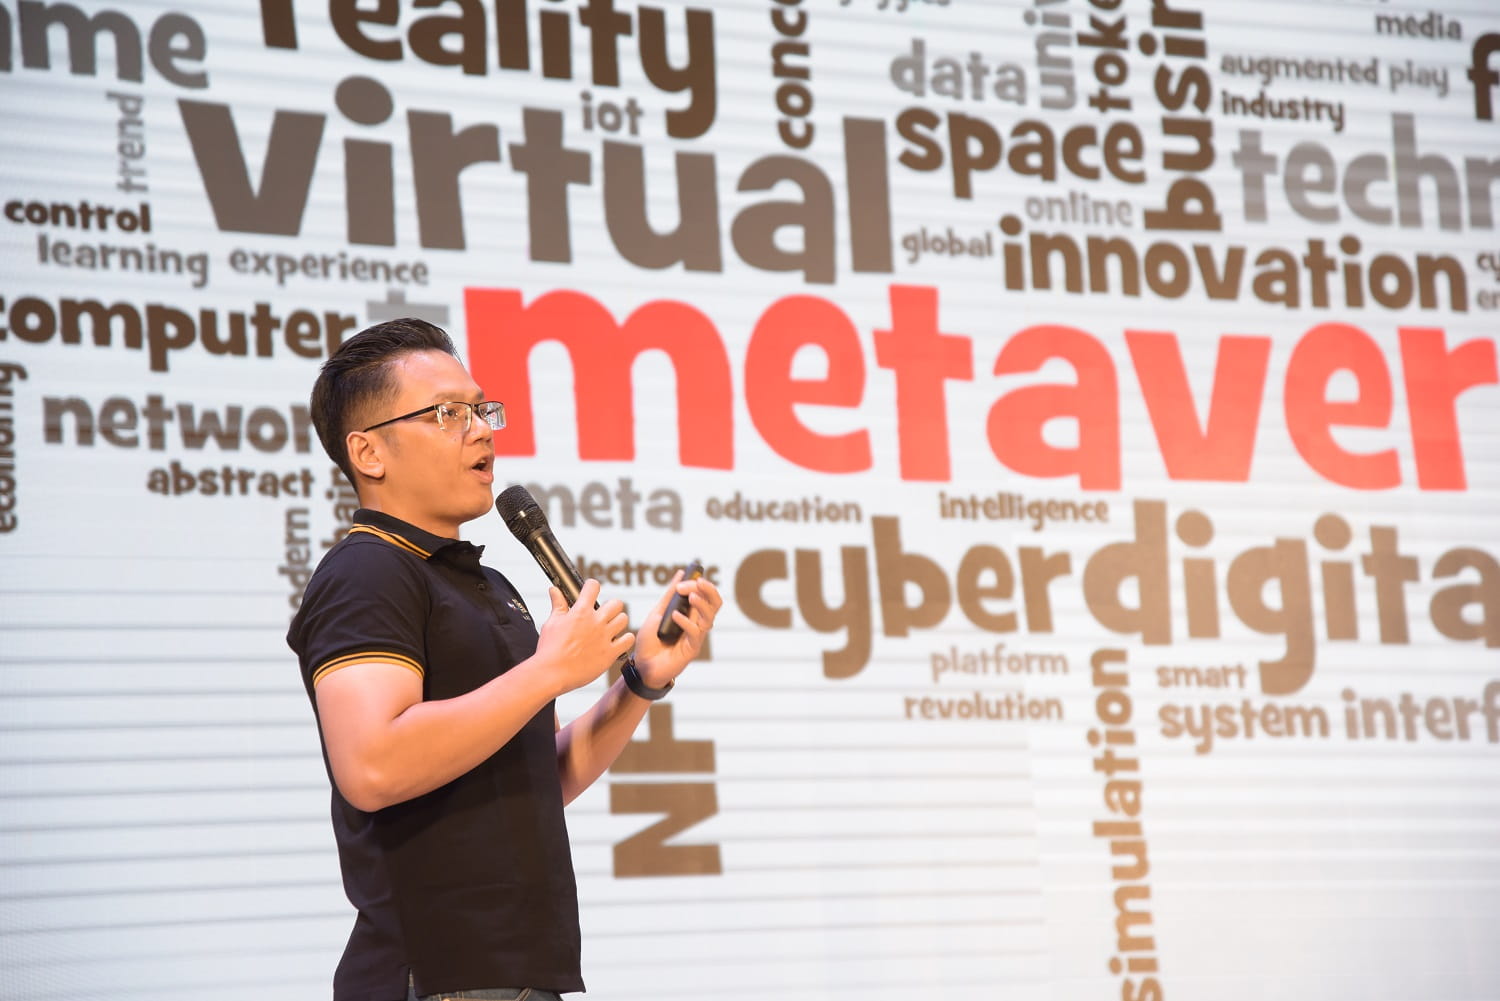 Dr. Dang Khanh Hung - Research Director at FPT Blockchain Lab - heated up the hall with the Metaverse and Blockchain topics